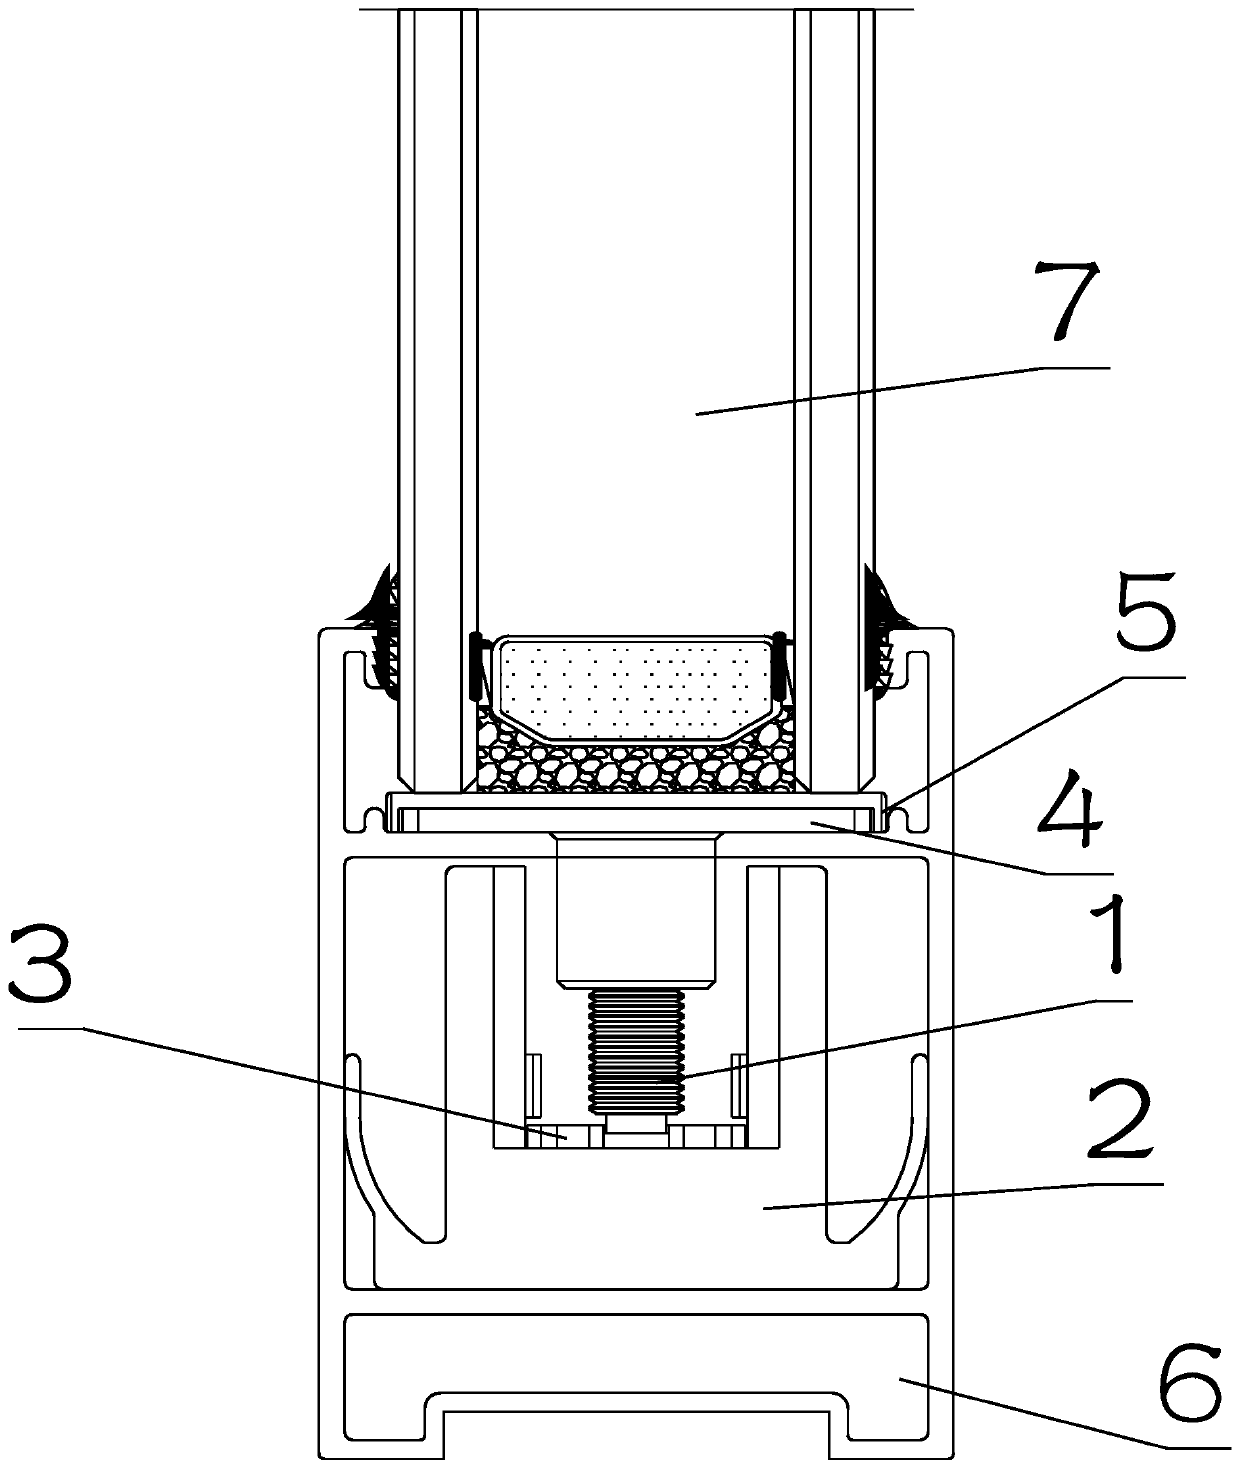 Device capable of being used for regulating glass